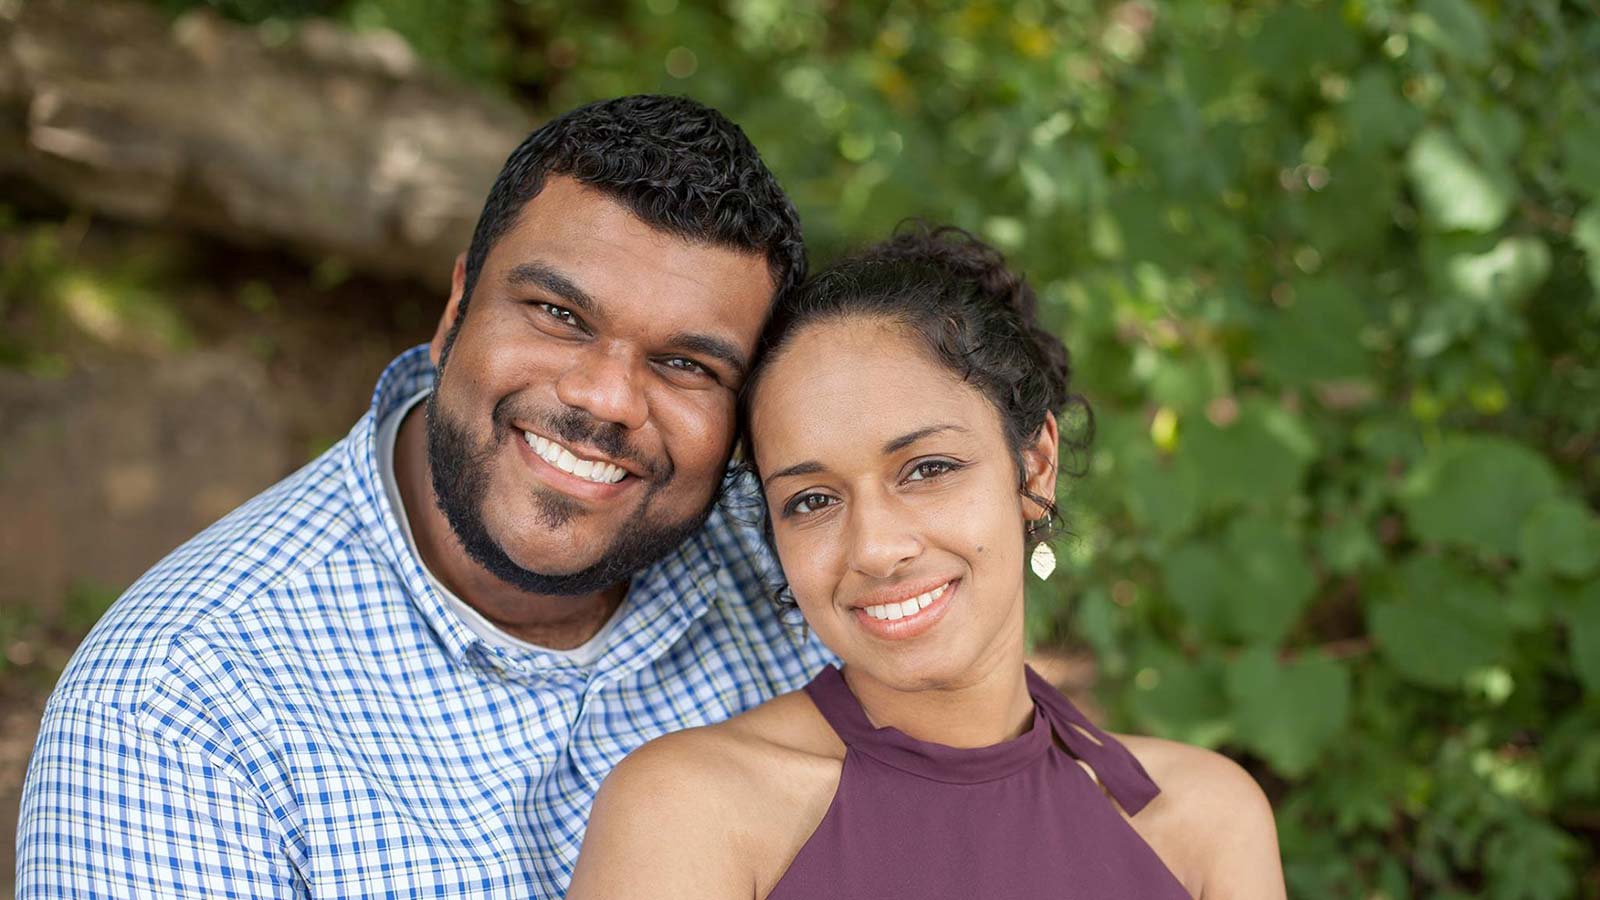 smiling man with beard and smiling woman with curly hair